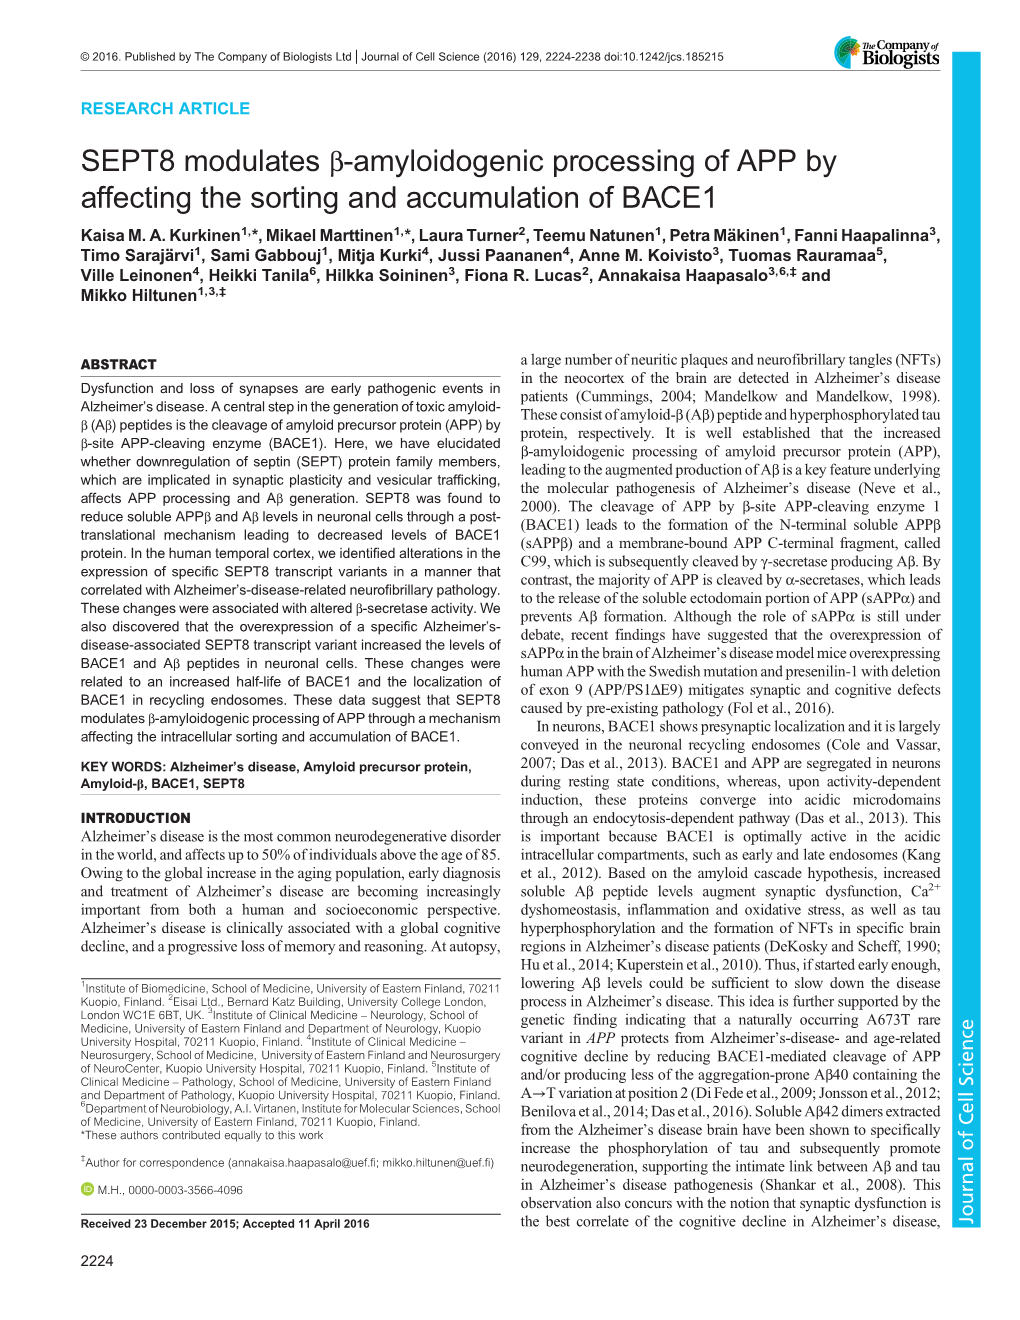 SEPT8 Modulates Β-Amyloidogenic Processing of APP by Affecting the Sorting and Accumulation of BACE1 Kaisa M